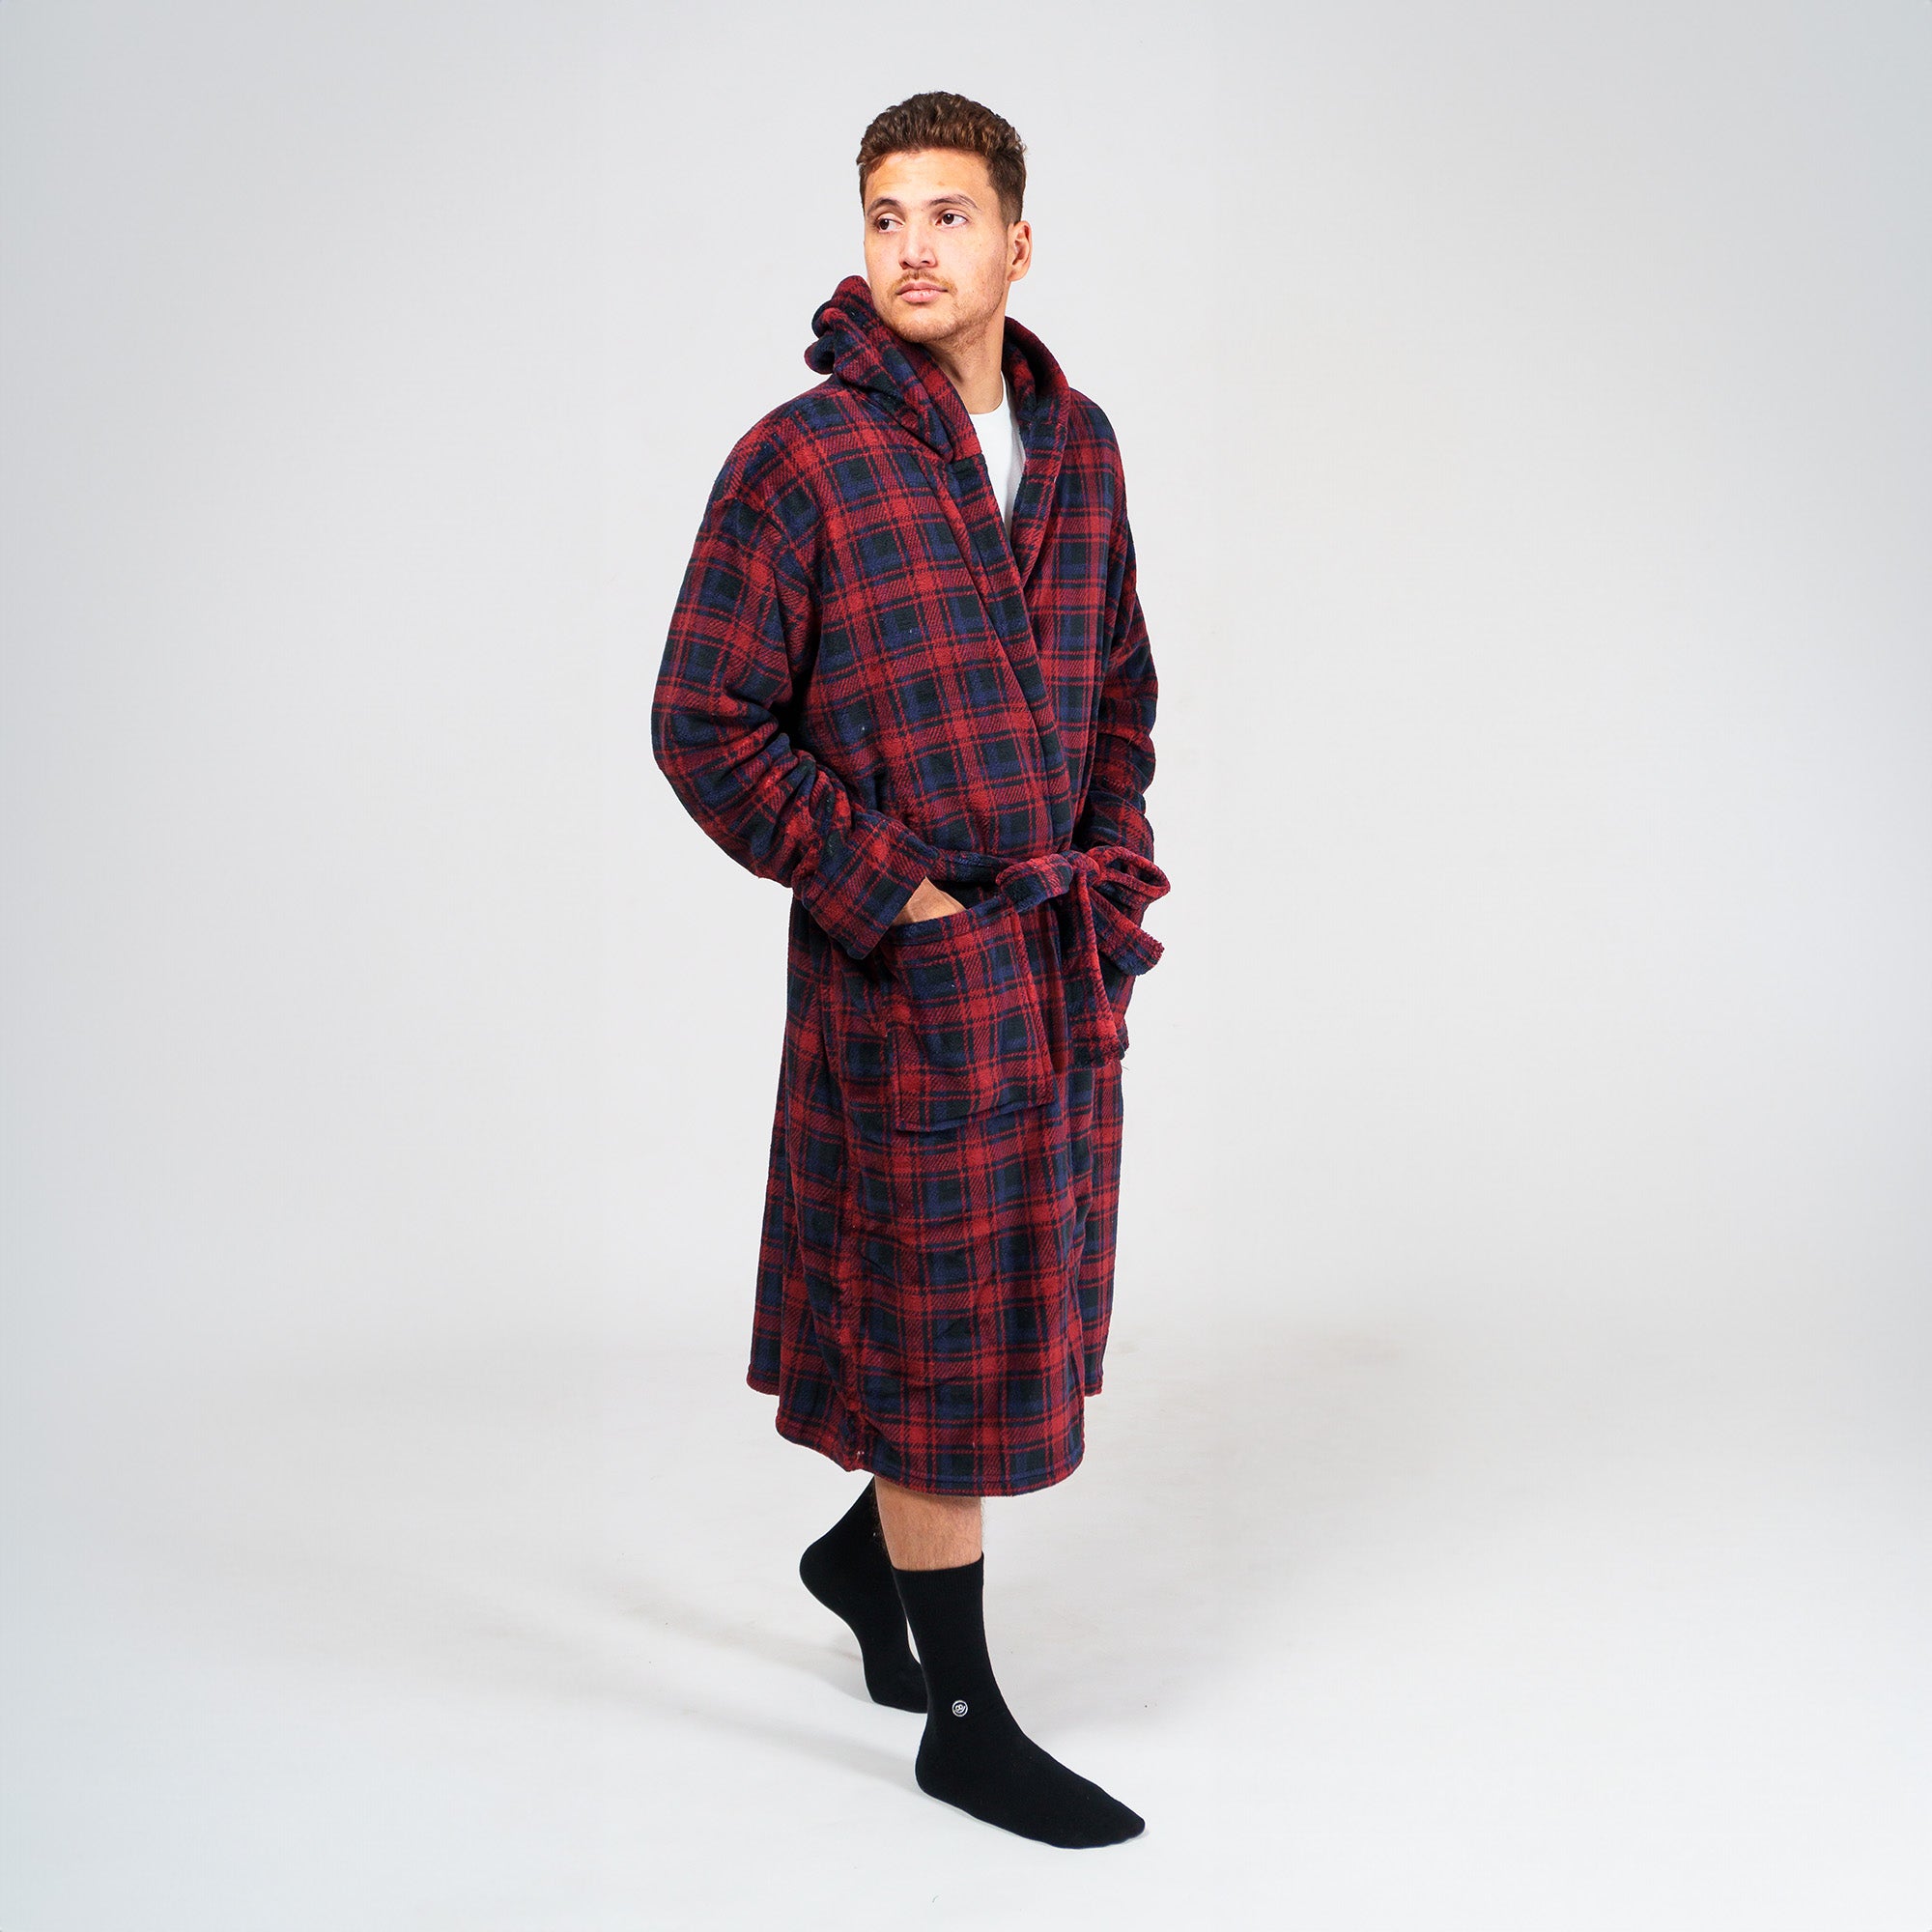 Hooded dressing gown Wanted plaid red